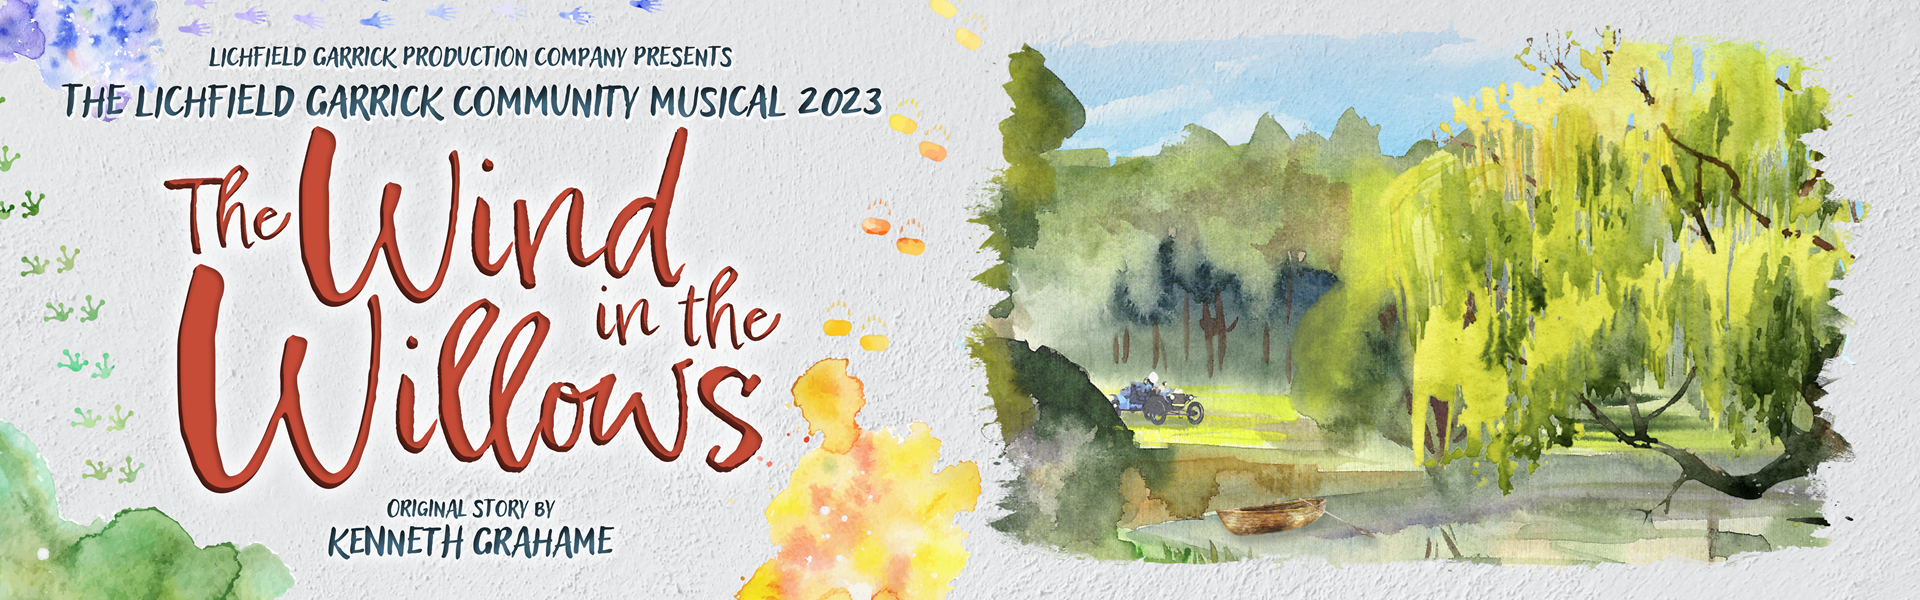 The Wind in the Willows - Our 2023 Community Musical